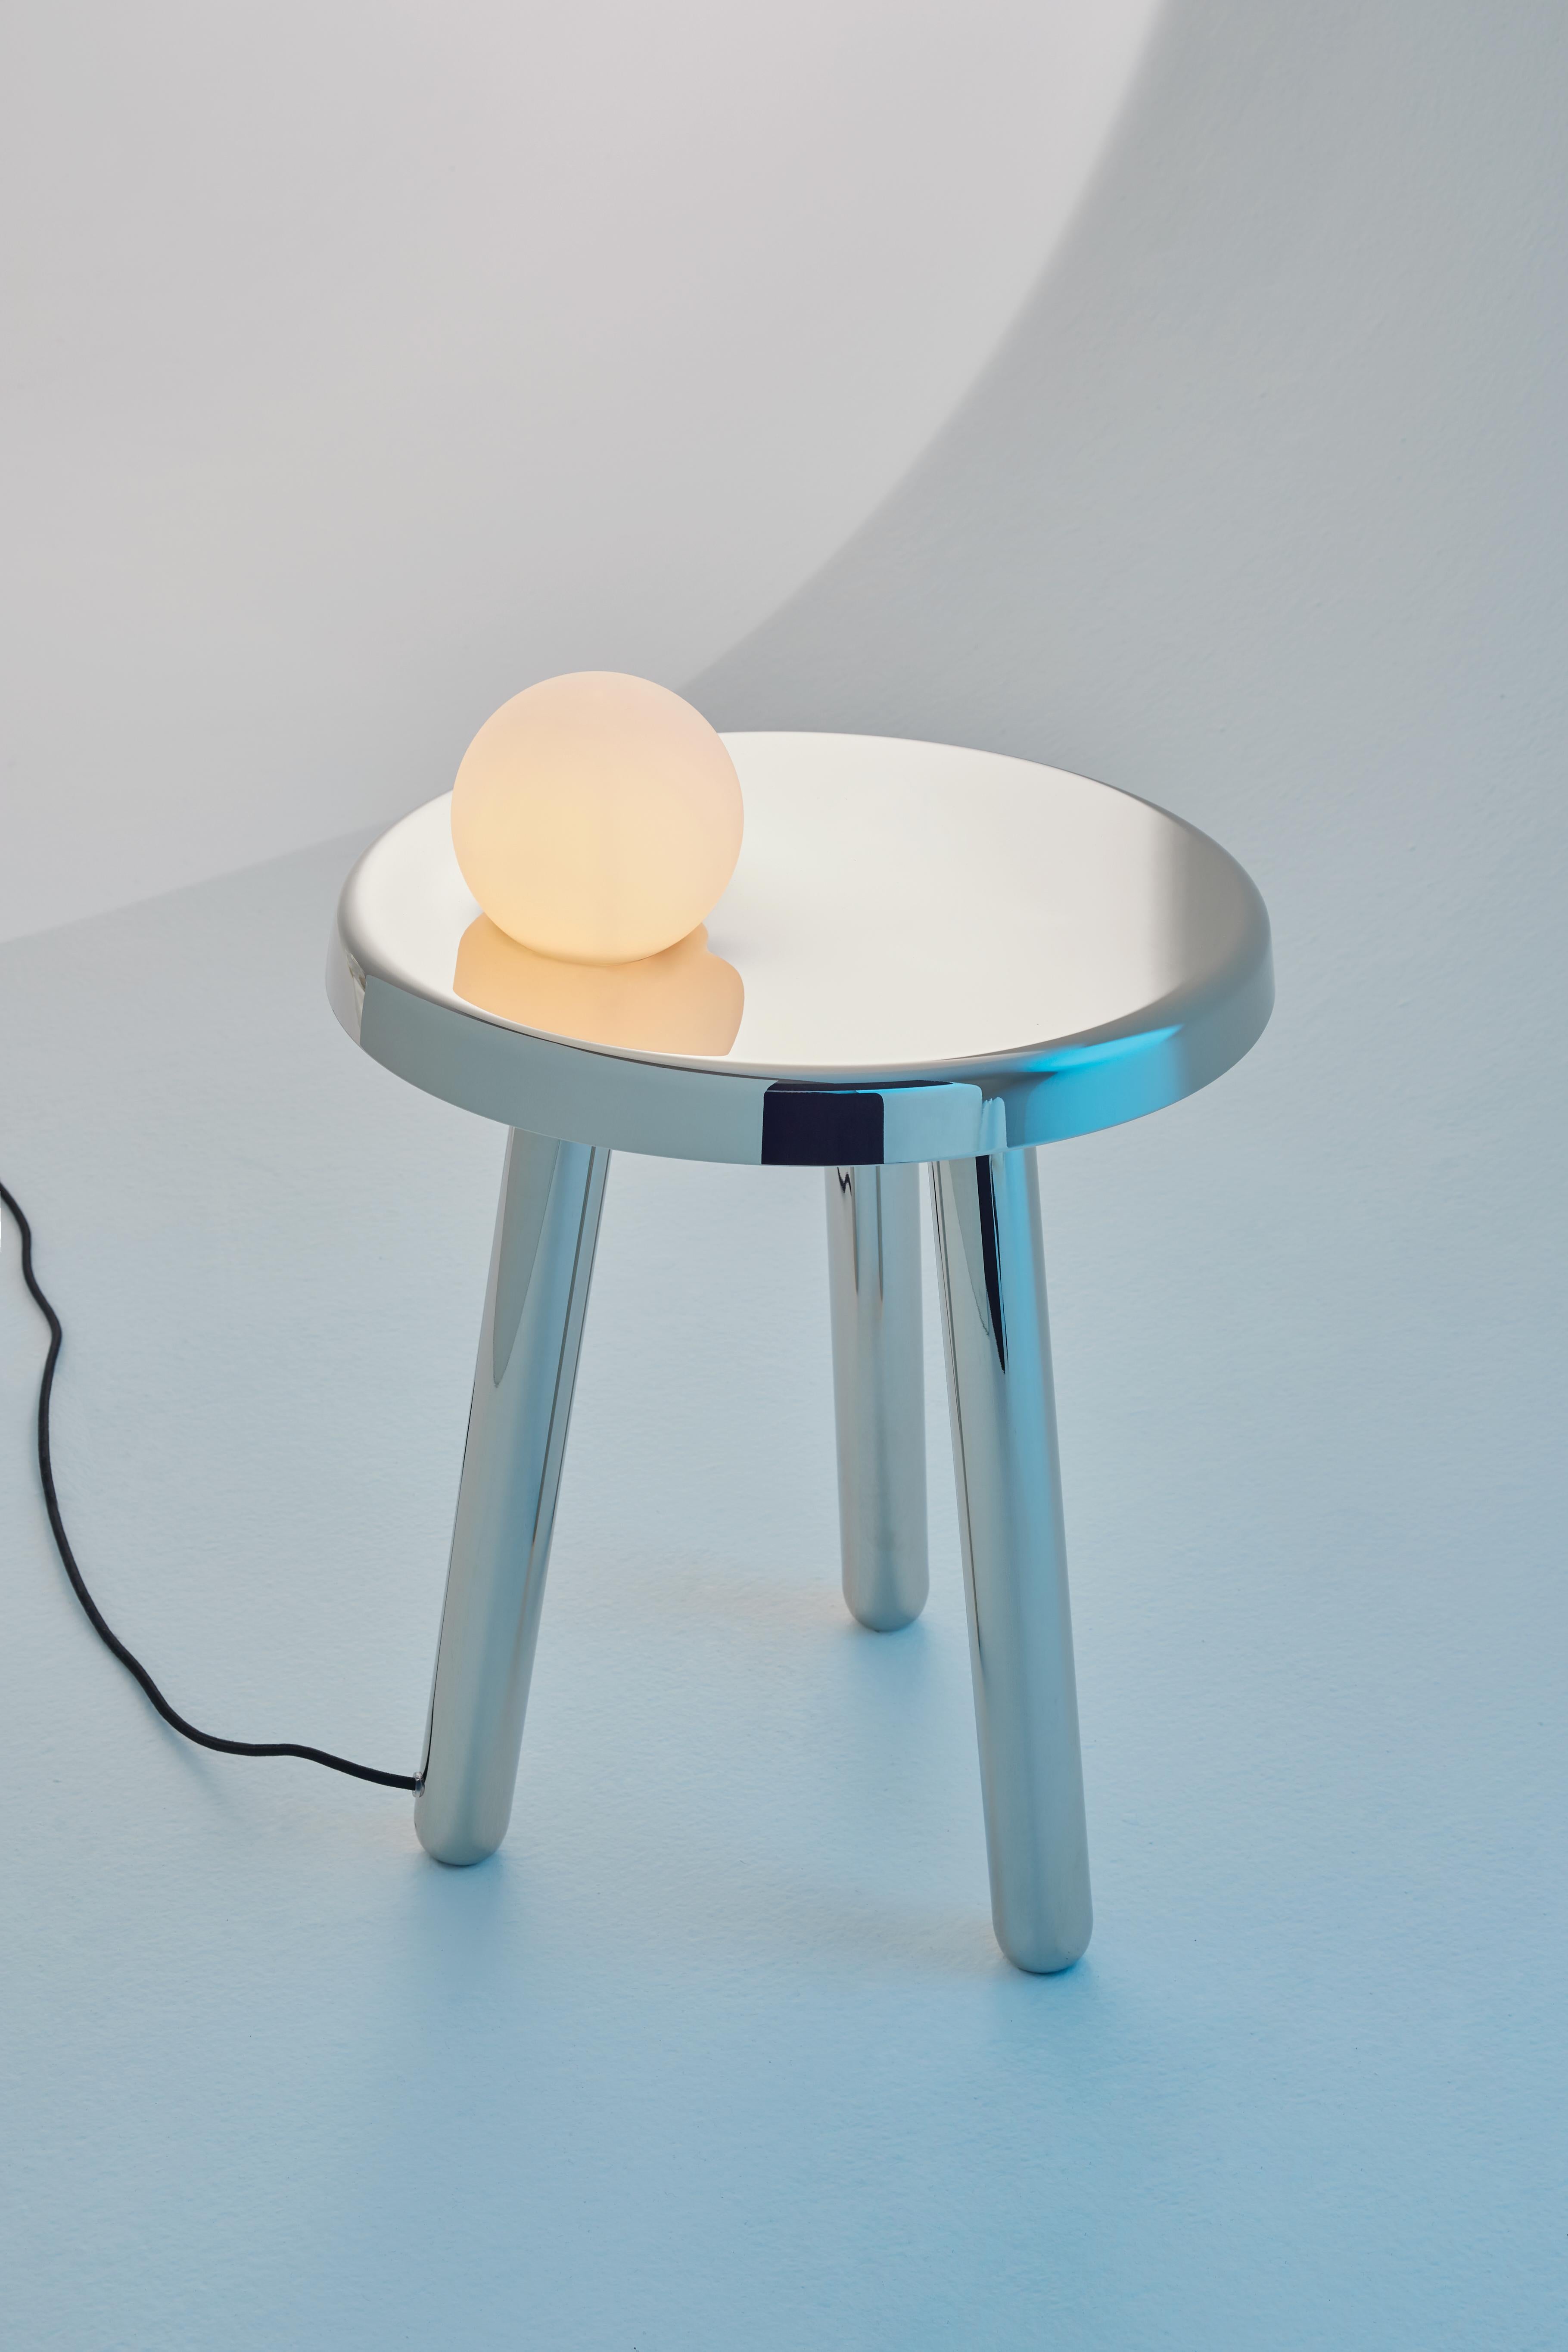 Metal Alby Light Grey Albi Small Table with Lamp by Mason Editions